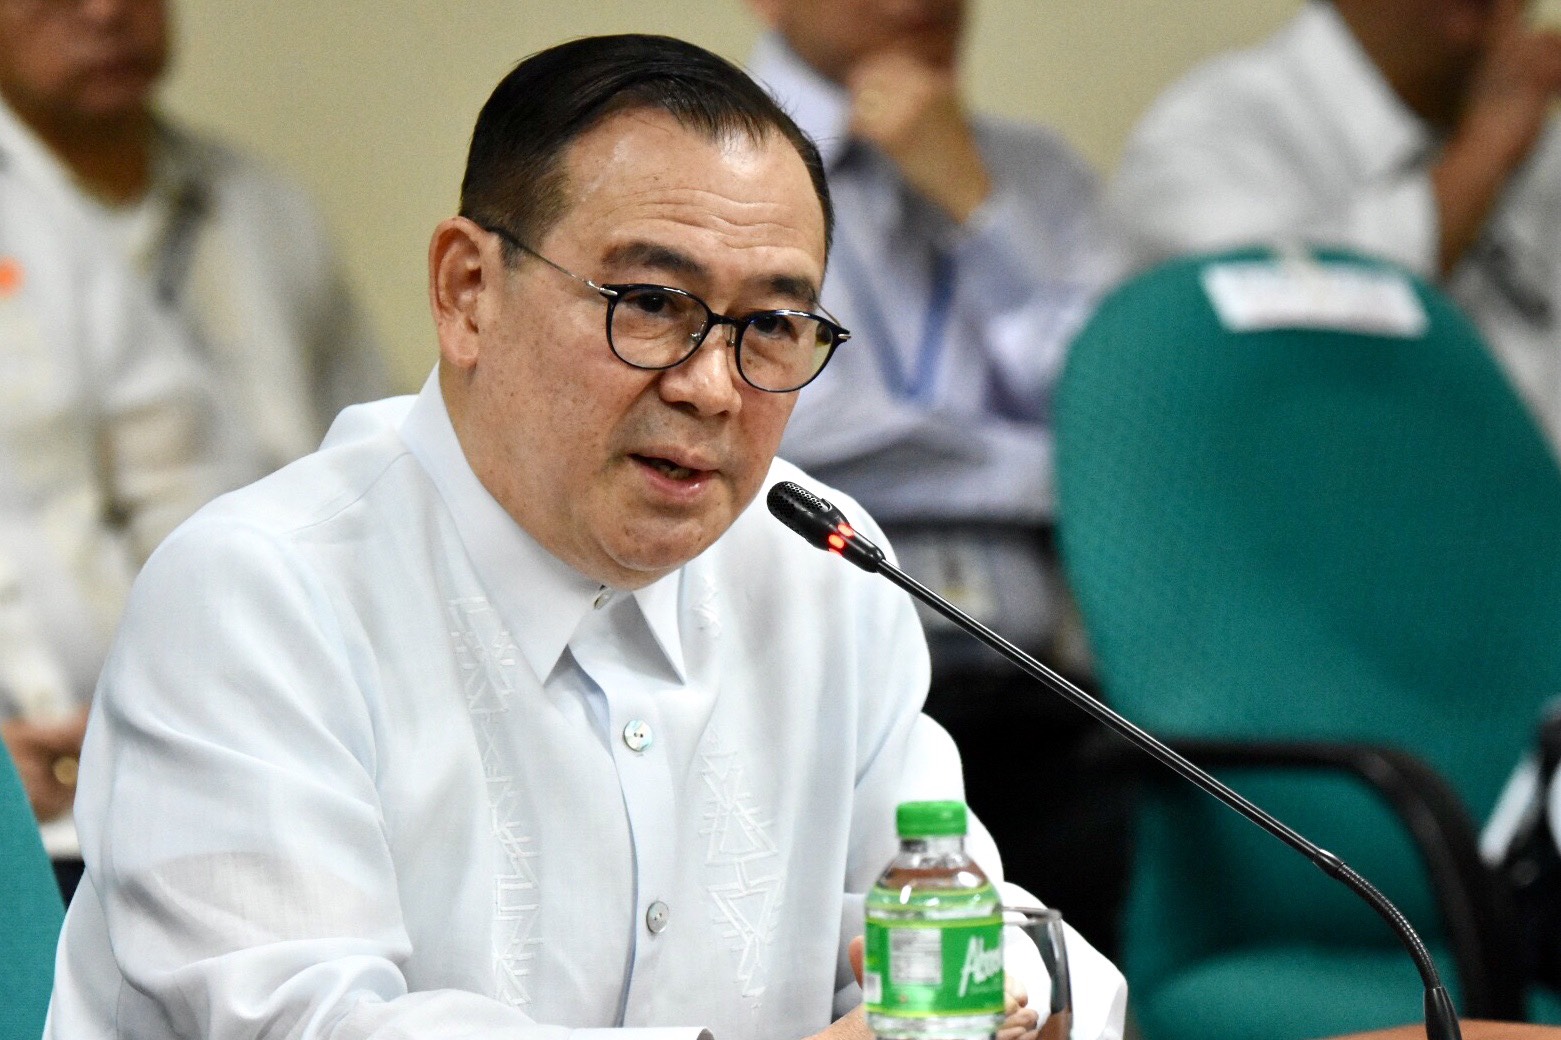 TOP DIPLOMAT. Foreign Secretary Teodoro Locsin Jr faces the Commission on Appointments on November 28, 2018. Photo by Angie de Silva/Rappler 